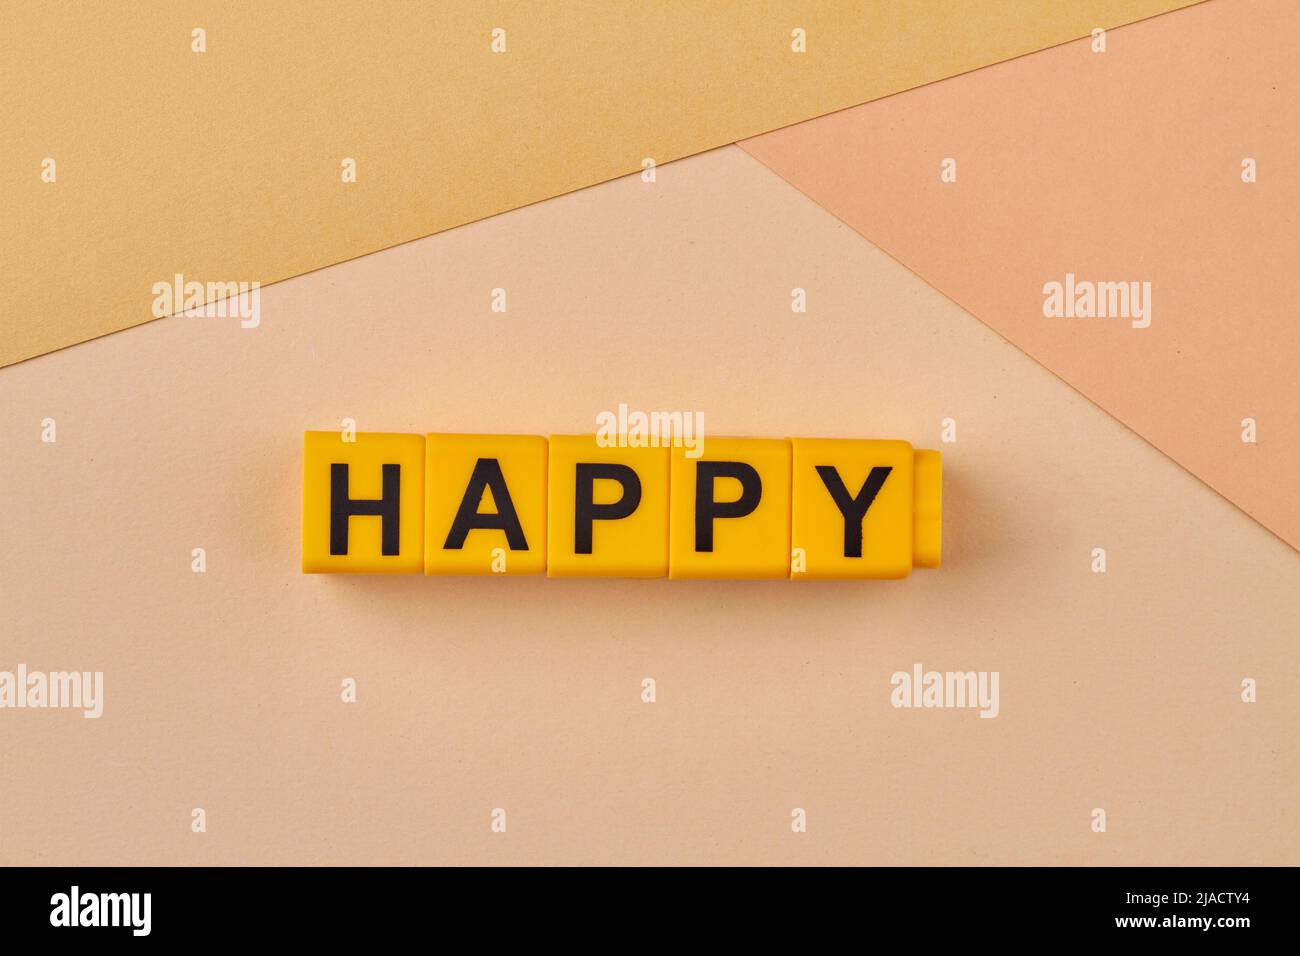 The word HAPPY written on yellow cubes close up. Feeling or showing pleasure or contentment. Fortunate and convenient. Stock Photo